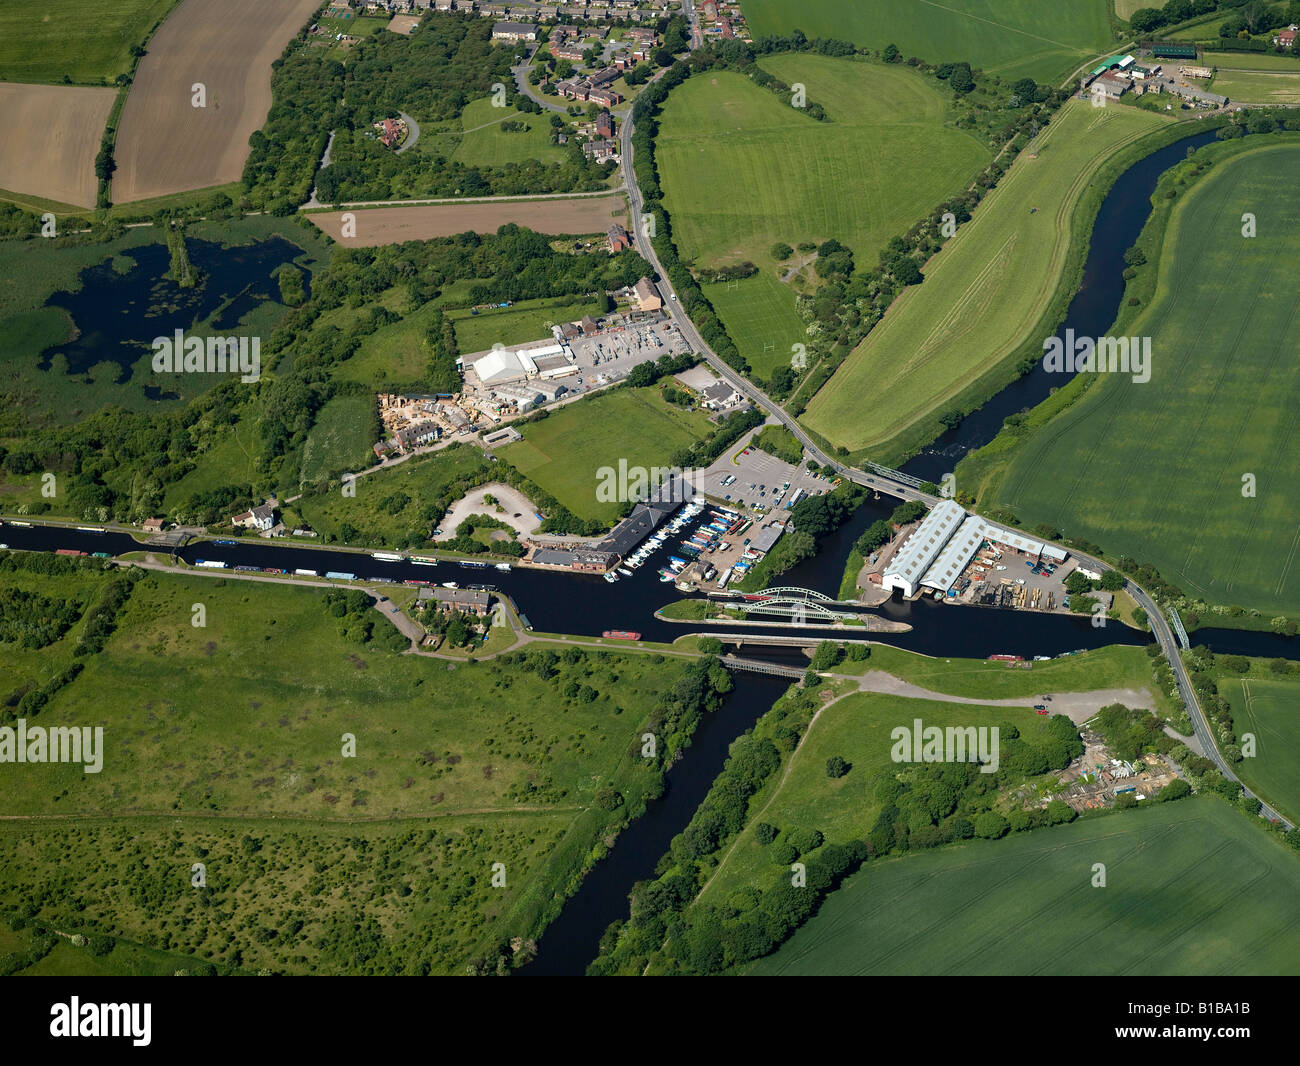 Canal e Aquaduct dall'aria, Stanley traghetto, Wakefield, West Yorkshire, nell'Inghilterra del Nord Foto Stock